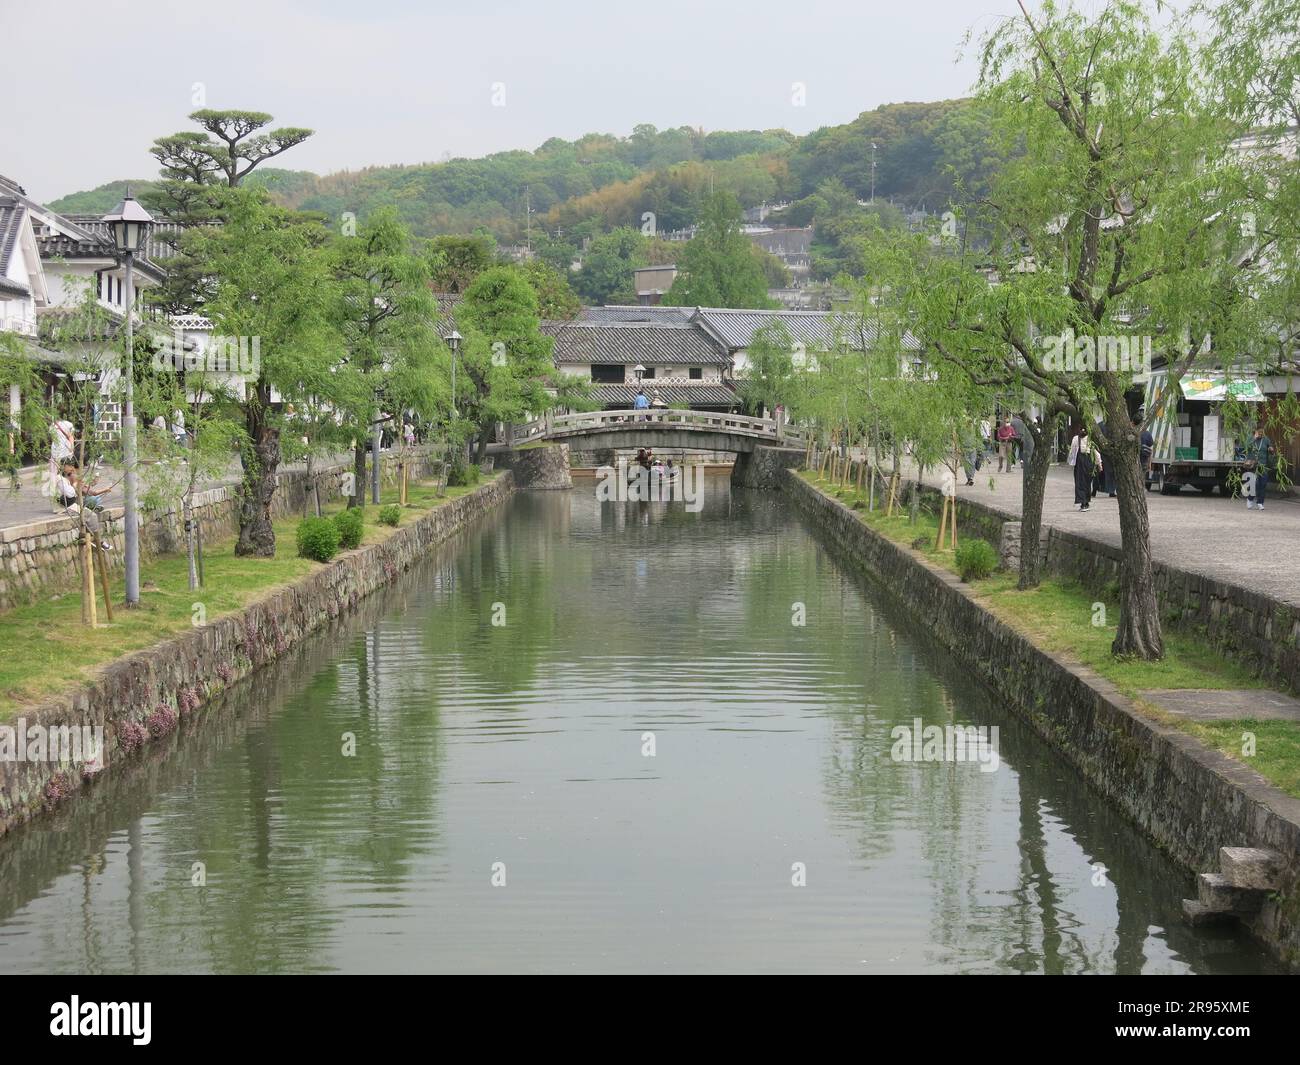 Kurashiki: one of the most picturesque towns in Japan with its white houses in the old merchant quarter and tree-lined canal with stone bridges. Stock Photo